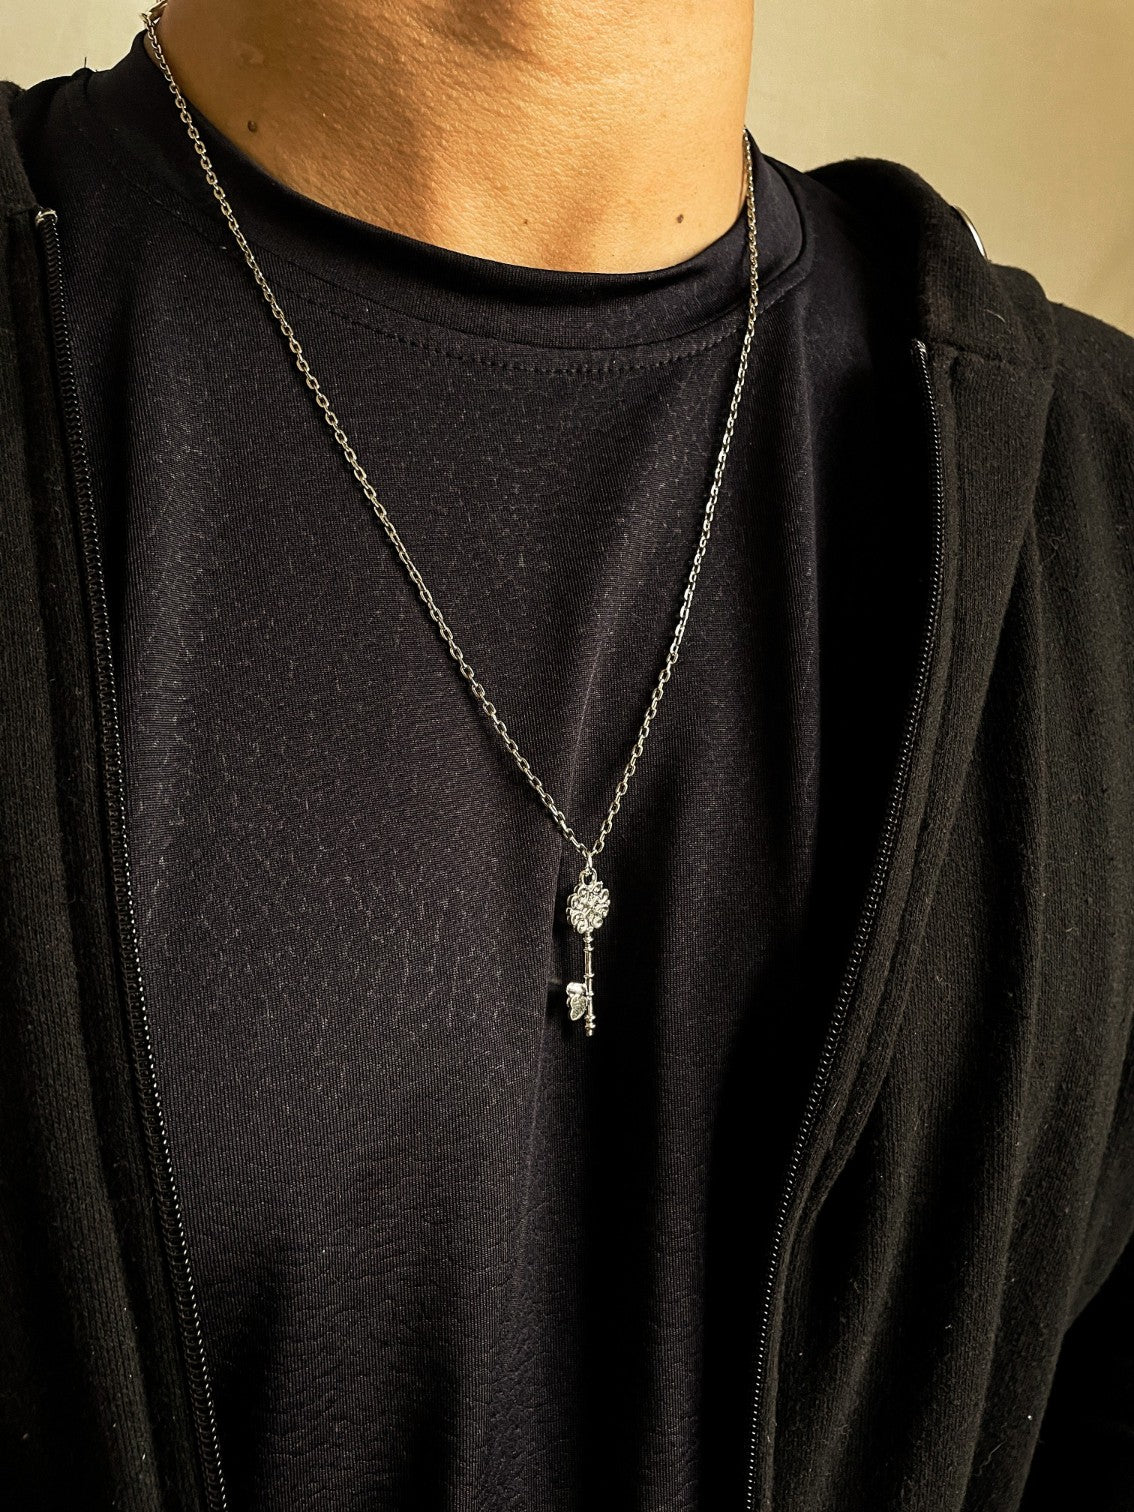 Silver Skeleton Key Pendant With Chain